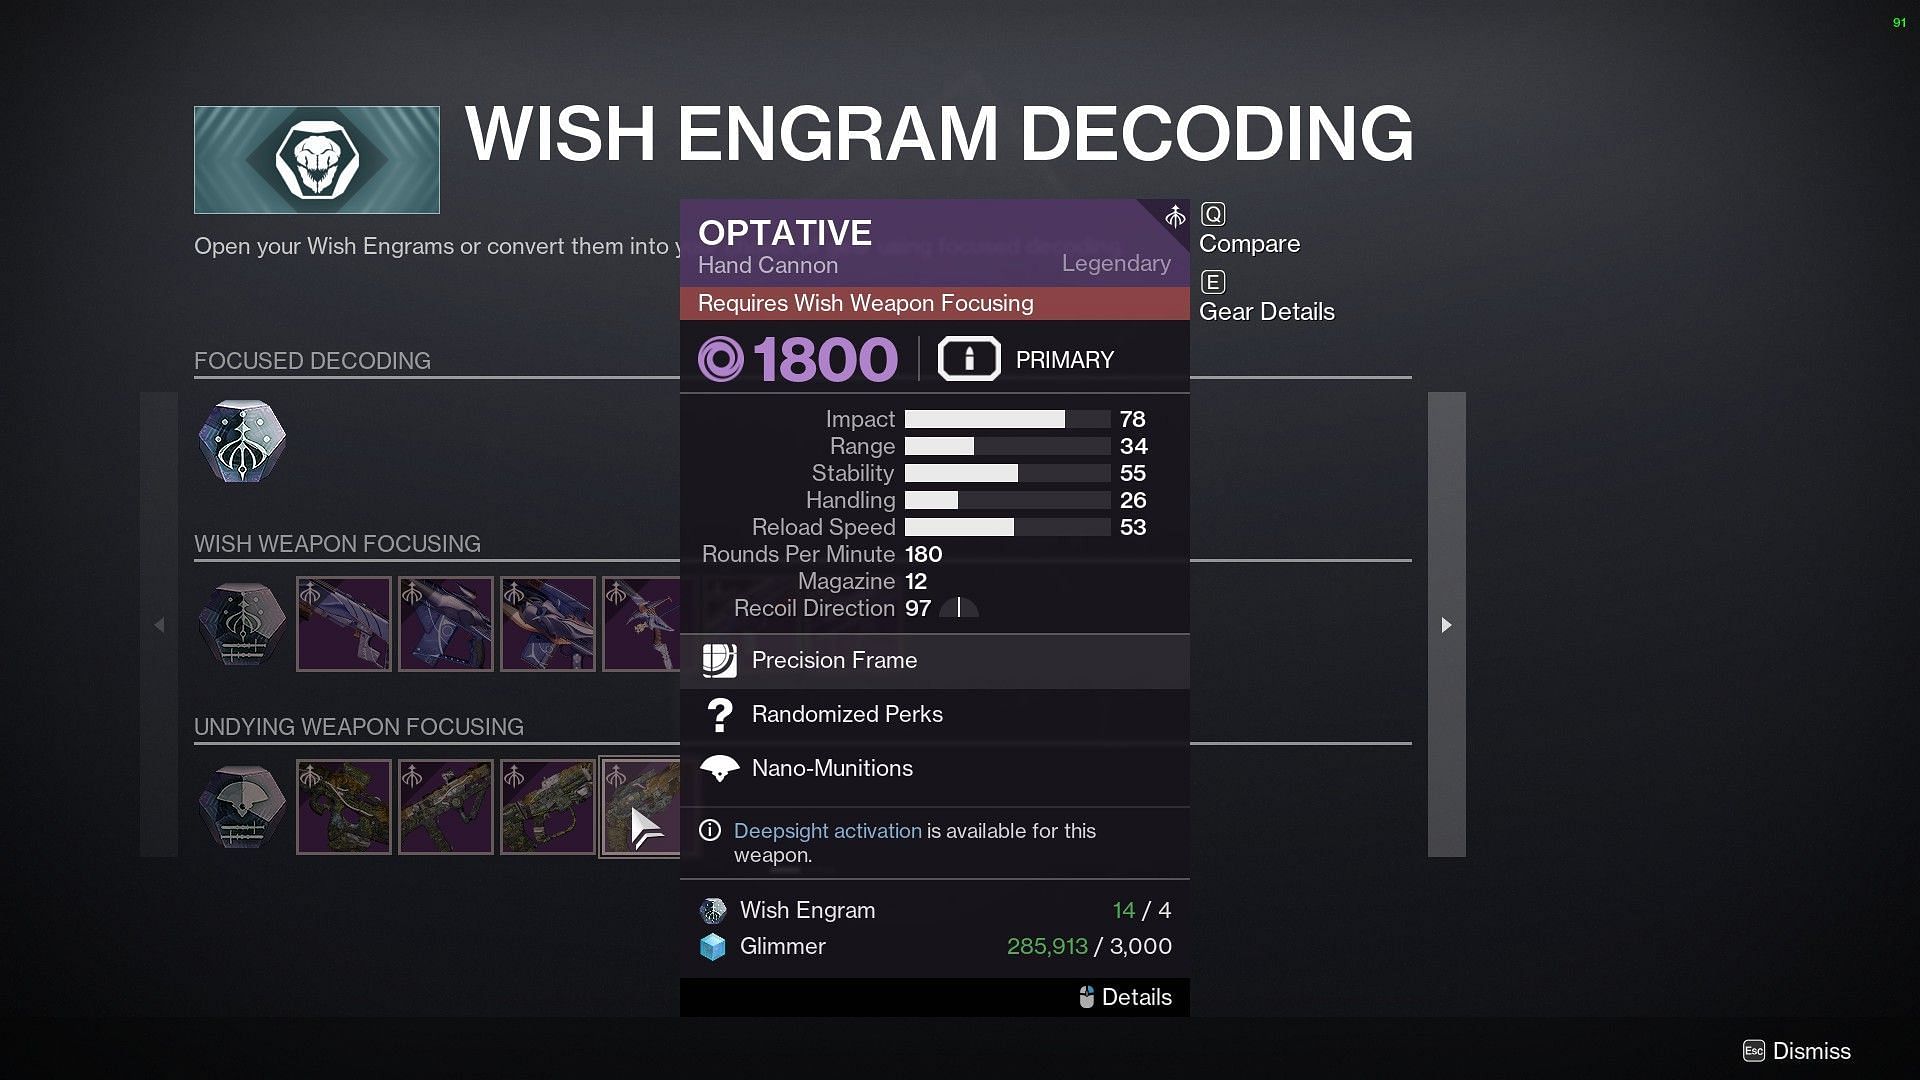 Optative in Wish Engram Decoding section of Destiny 2 (Image via Bungie)